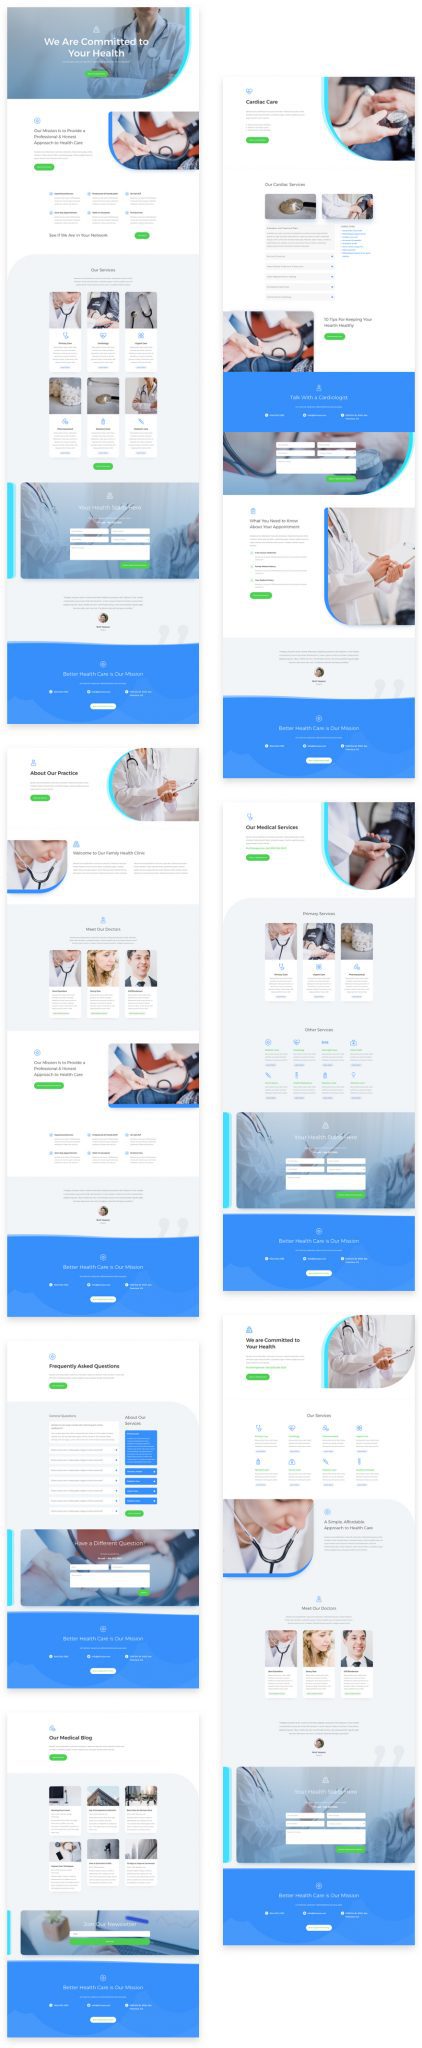 Doctor’s Office Layout Pack